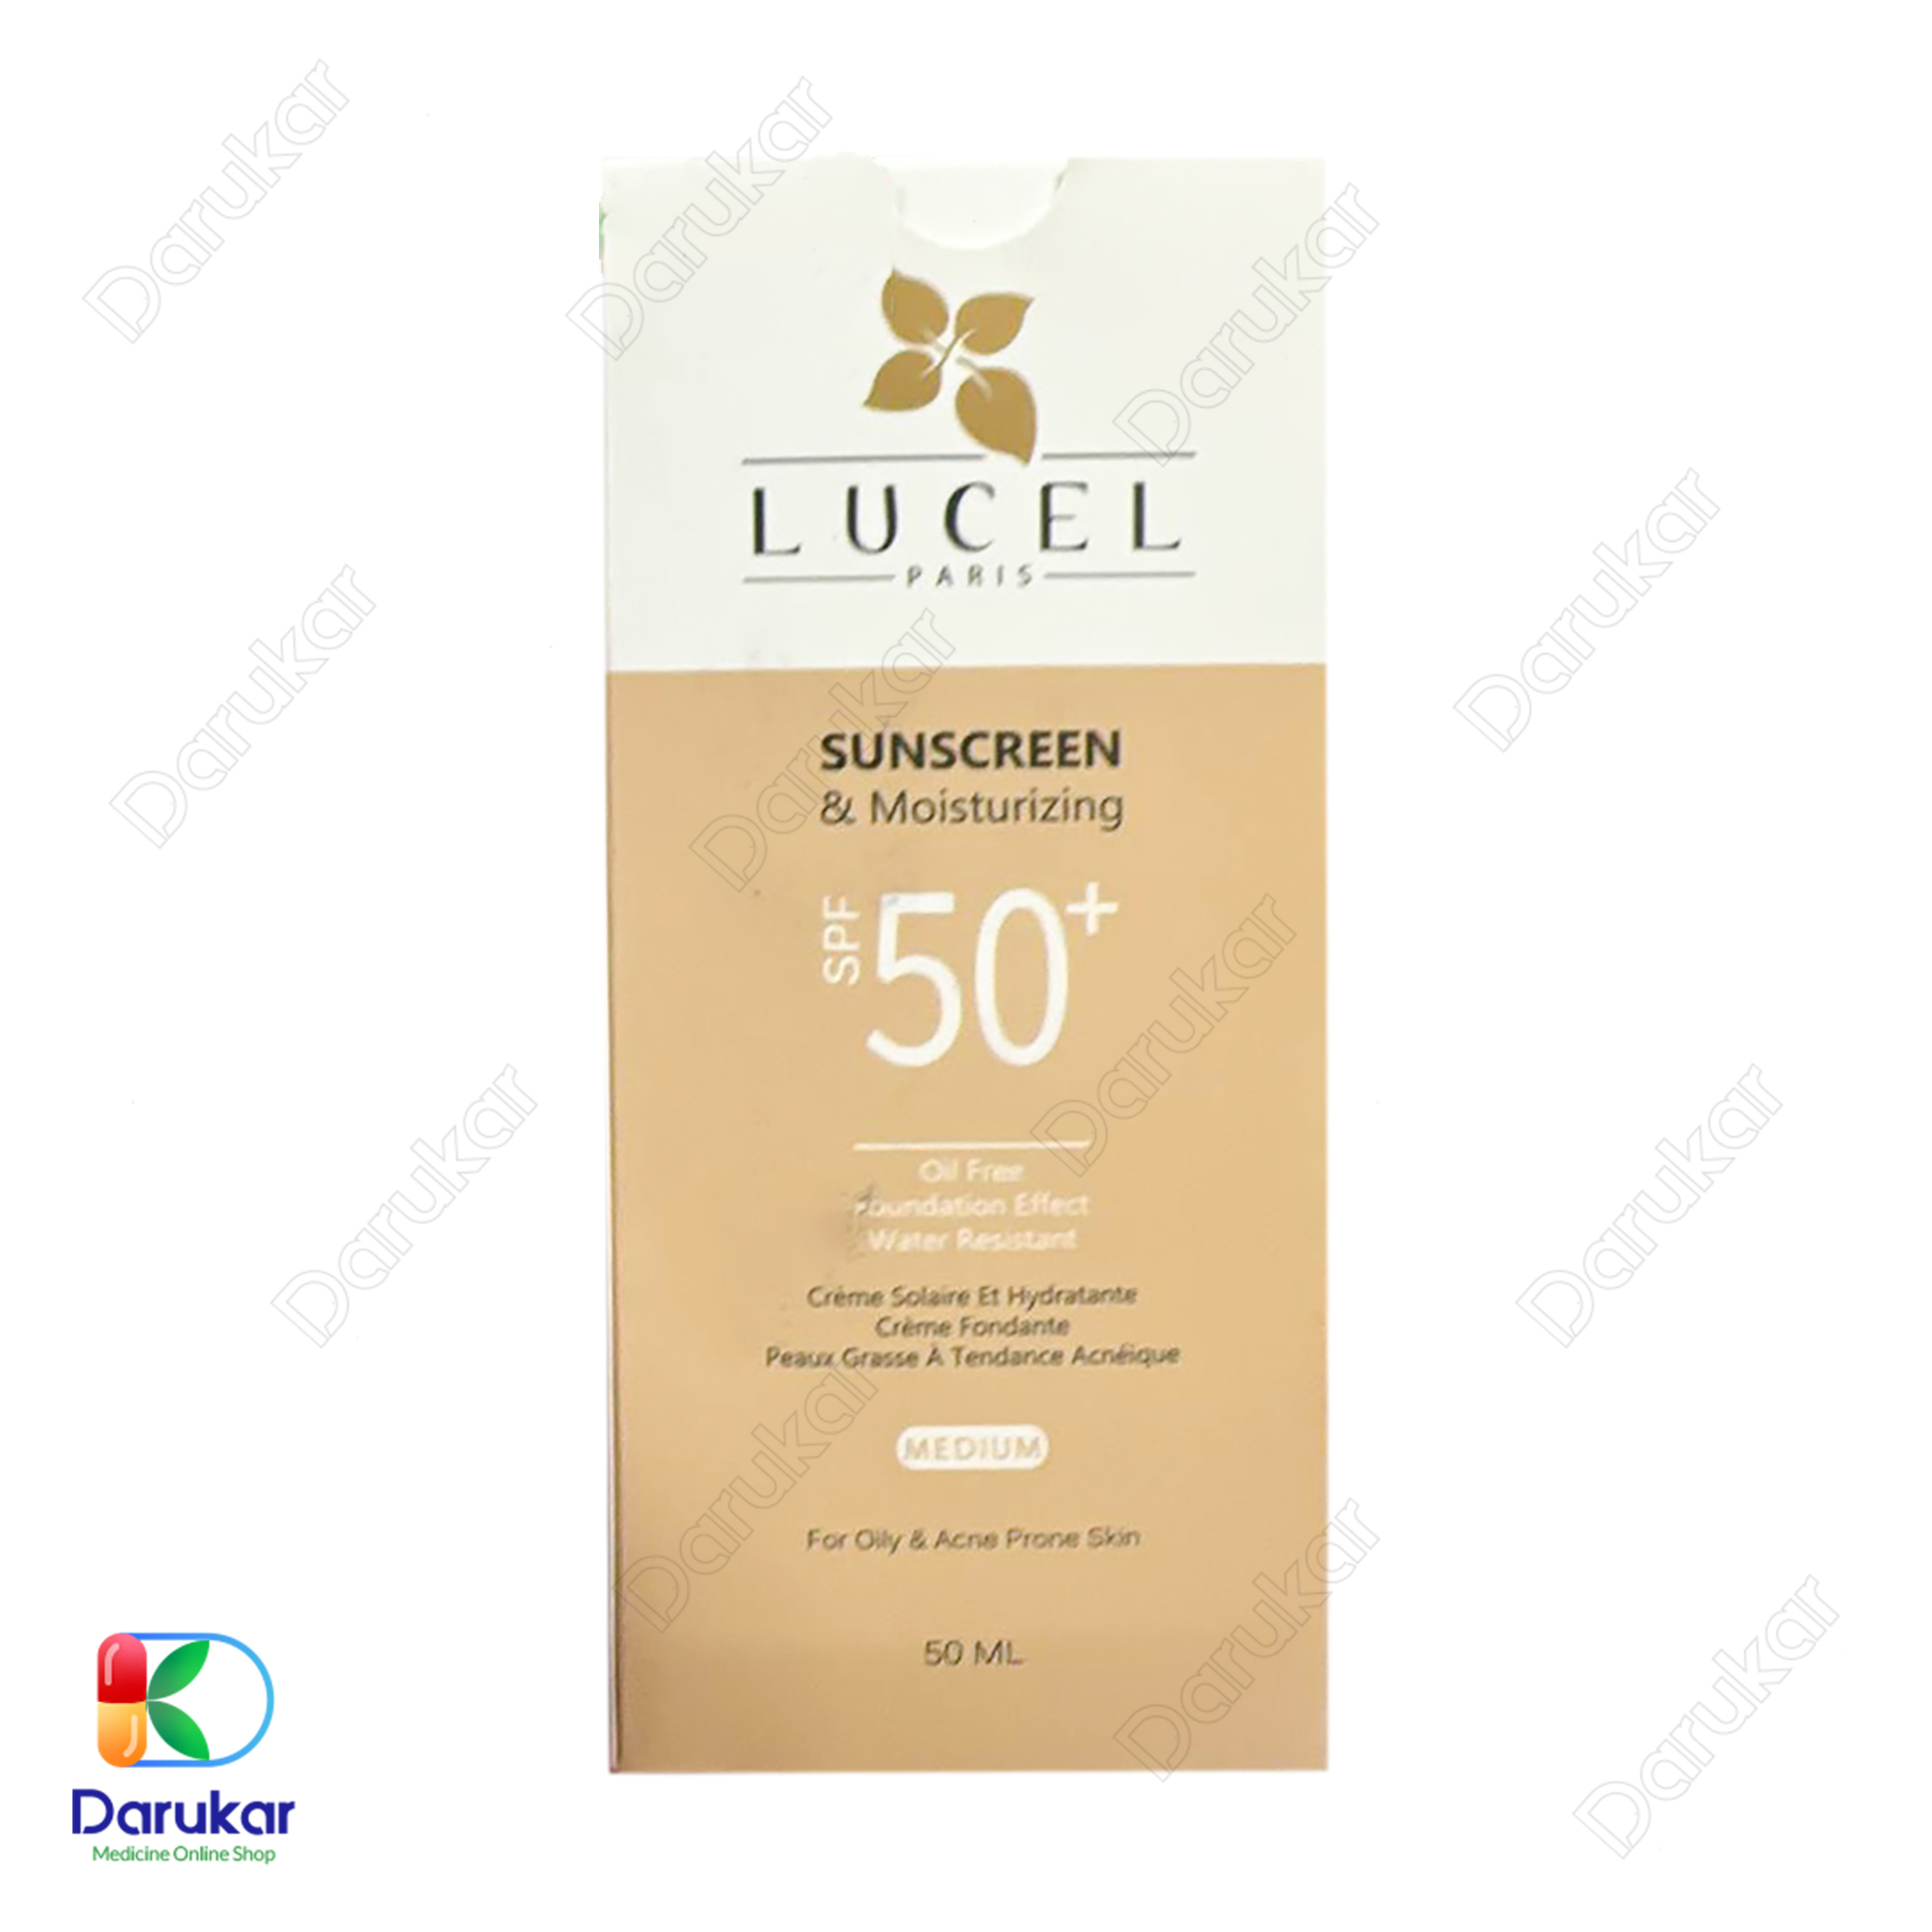 lucel sunscreen moisturizing oil free for oily and acne skin 1